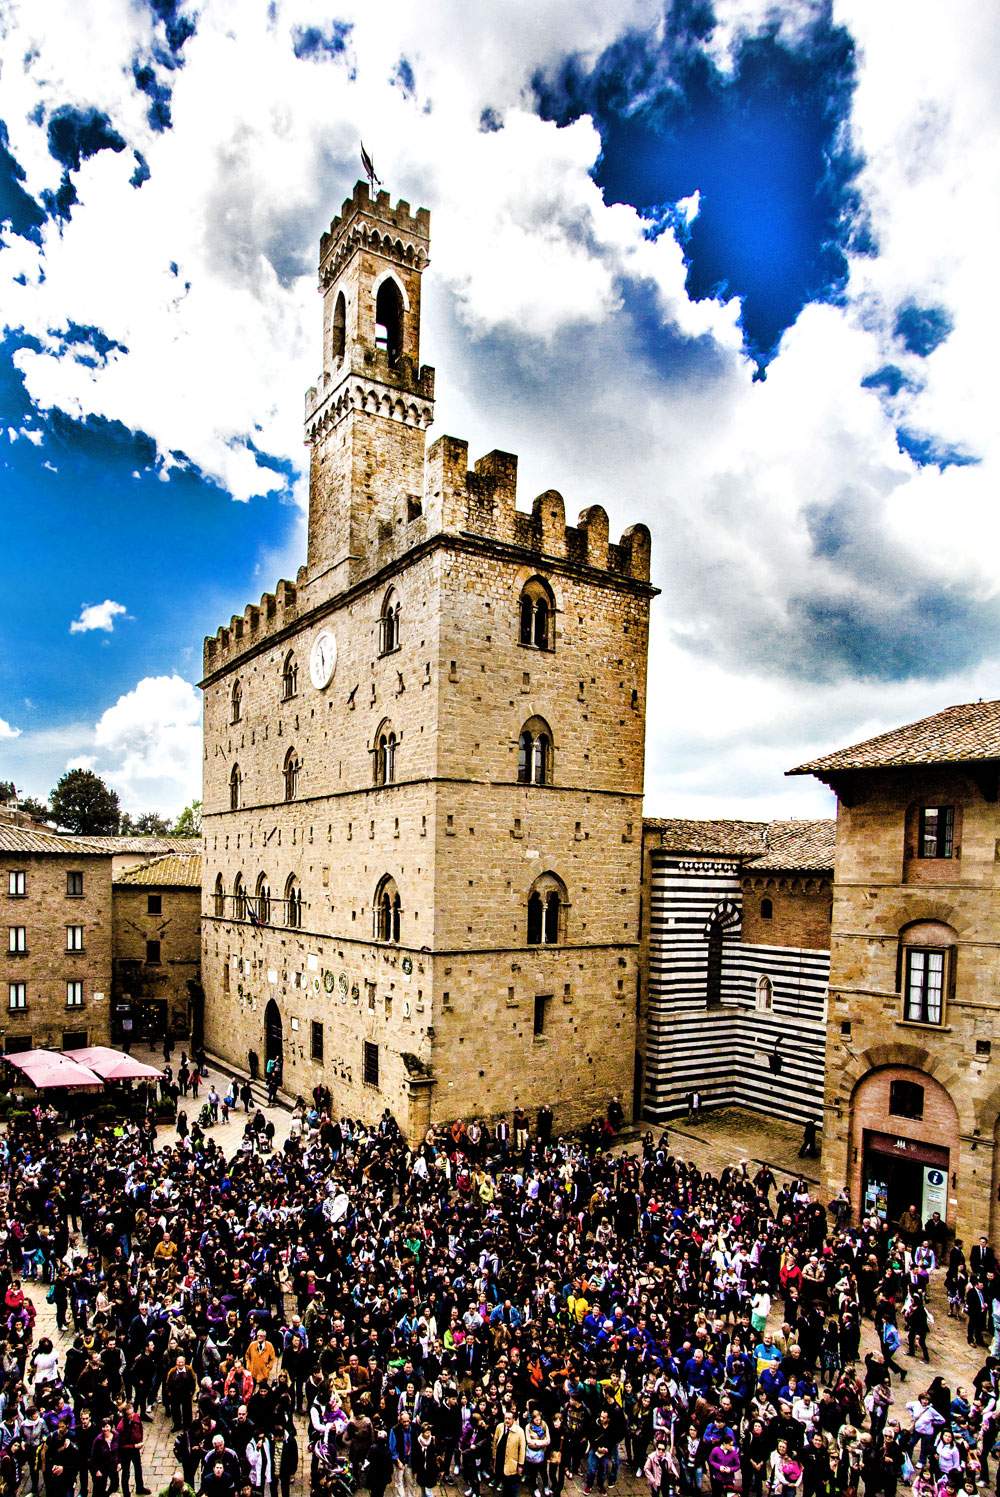 Volterra, candidate for Italian Capital of Culture 2021, focuses on Human Re-generation